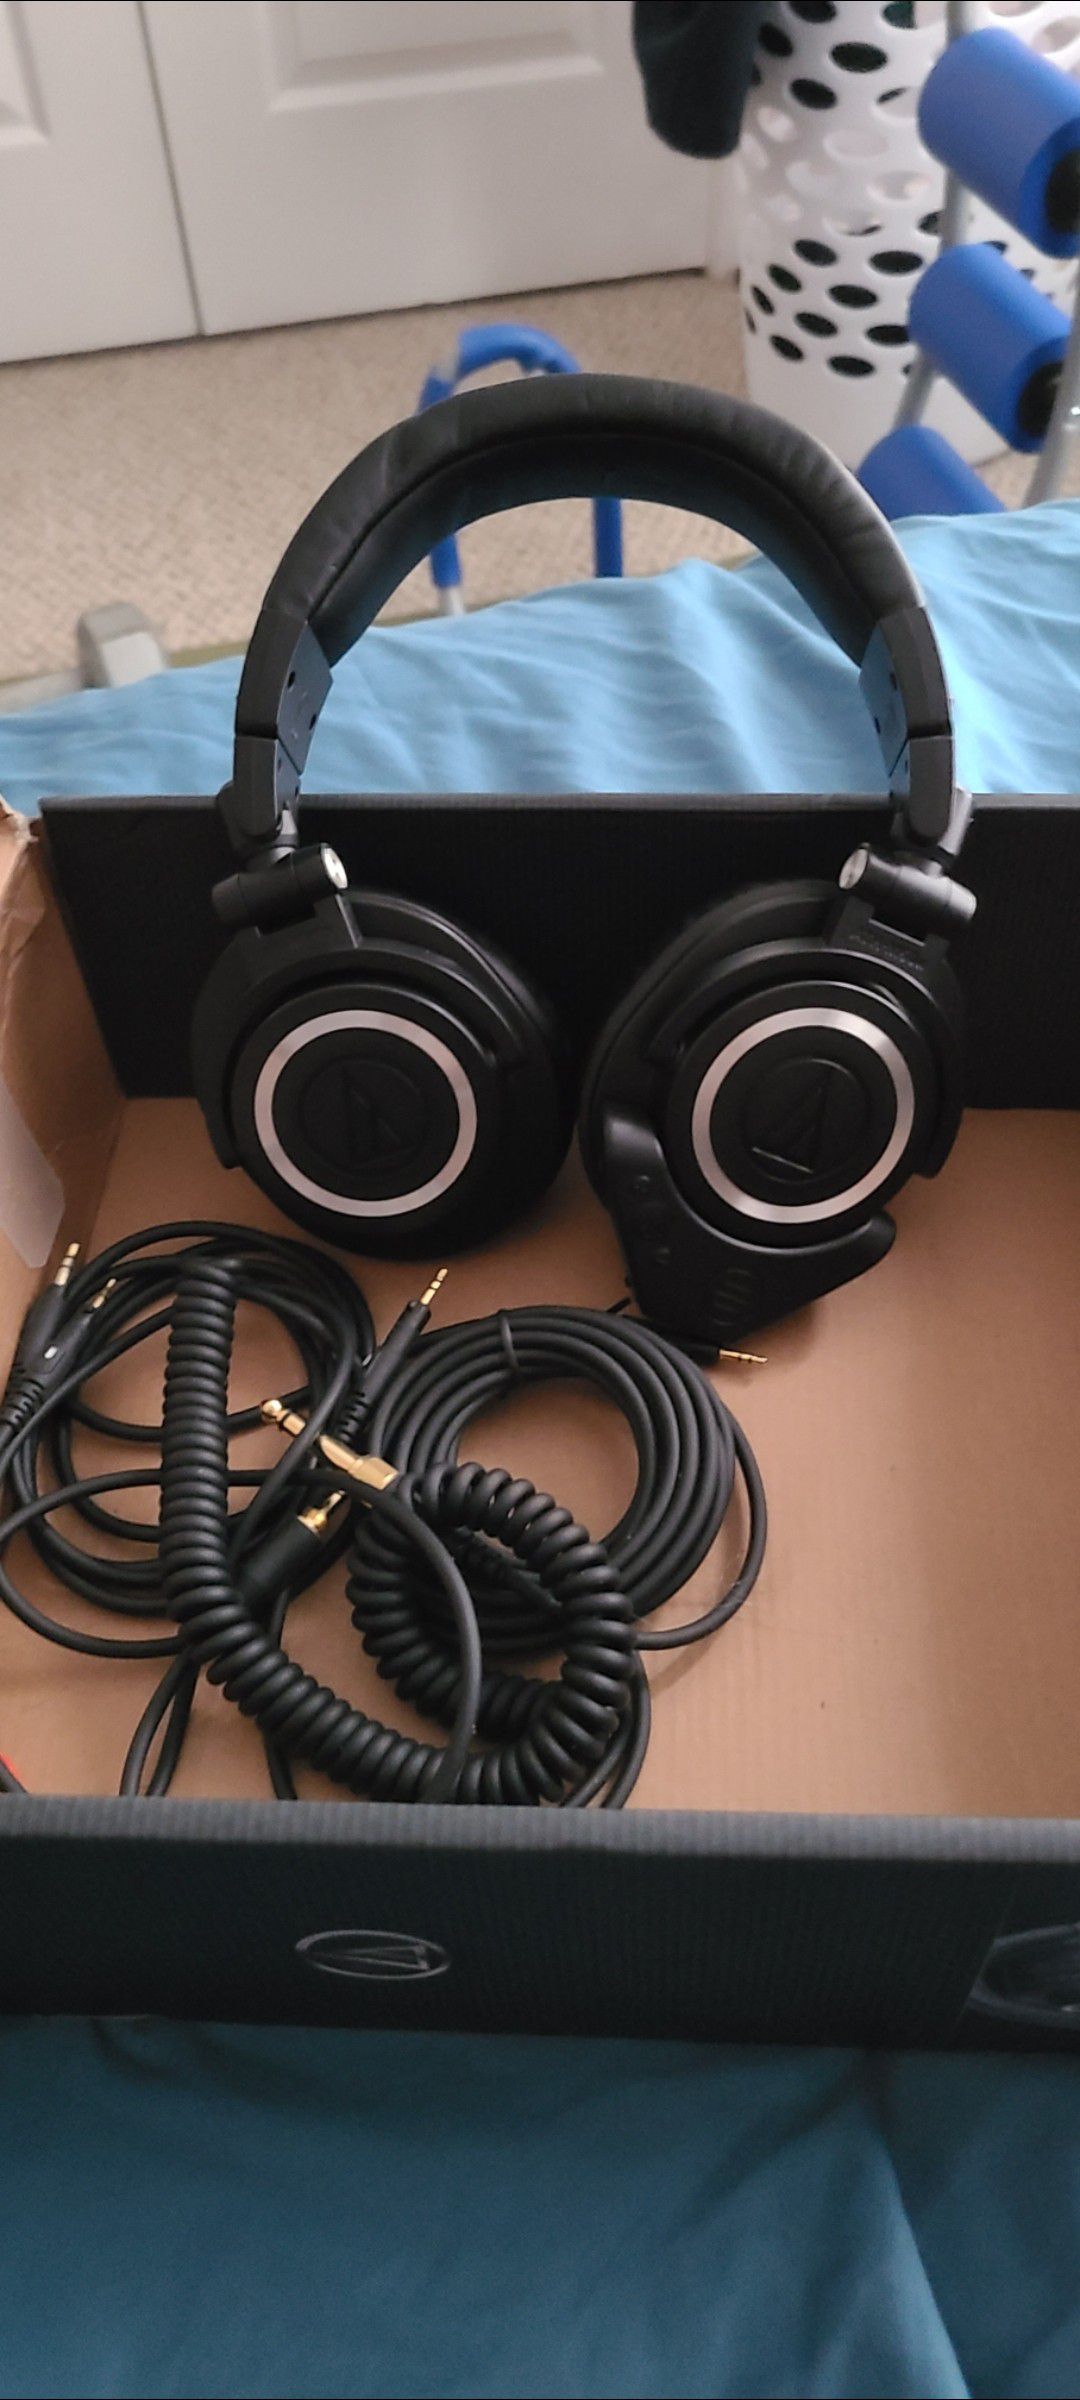 Audio technica ath-m50x looking for cash or trades